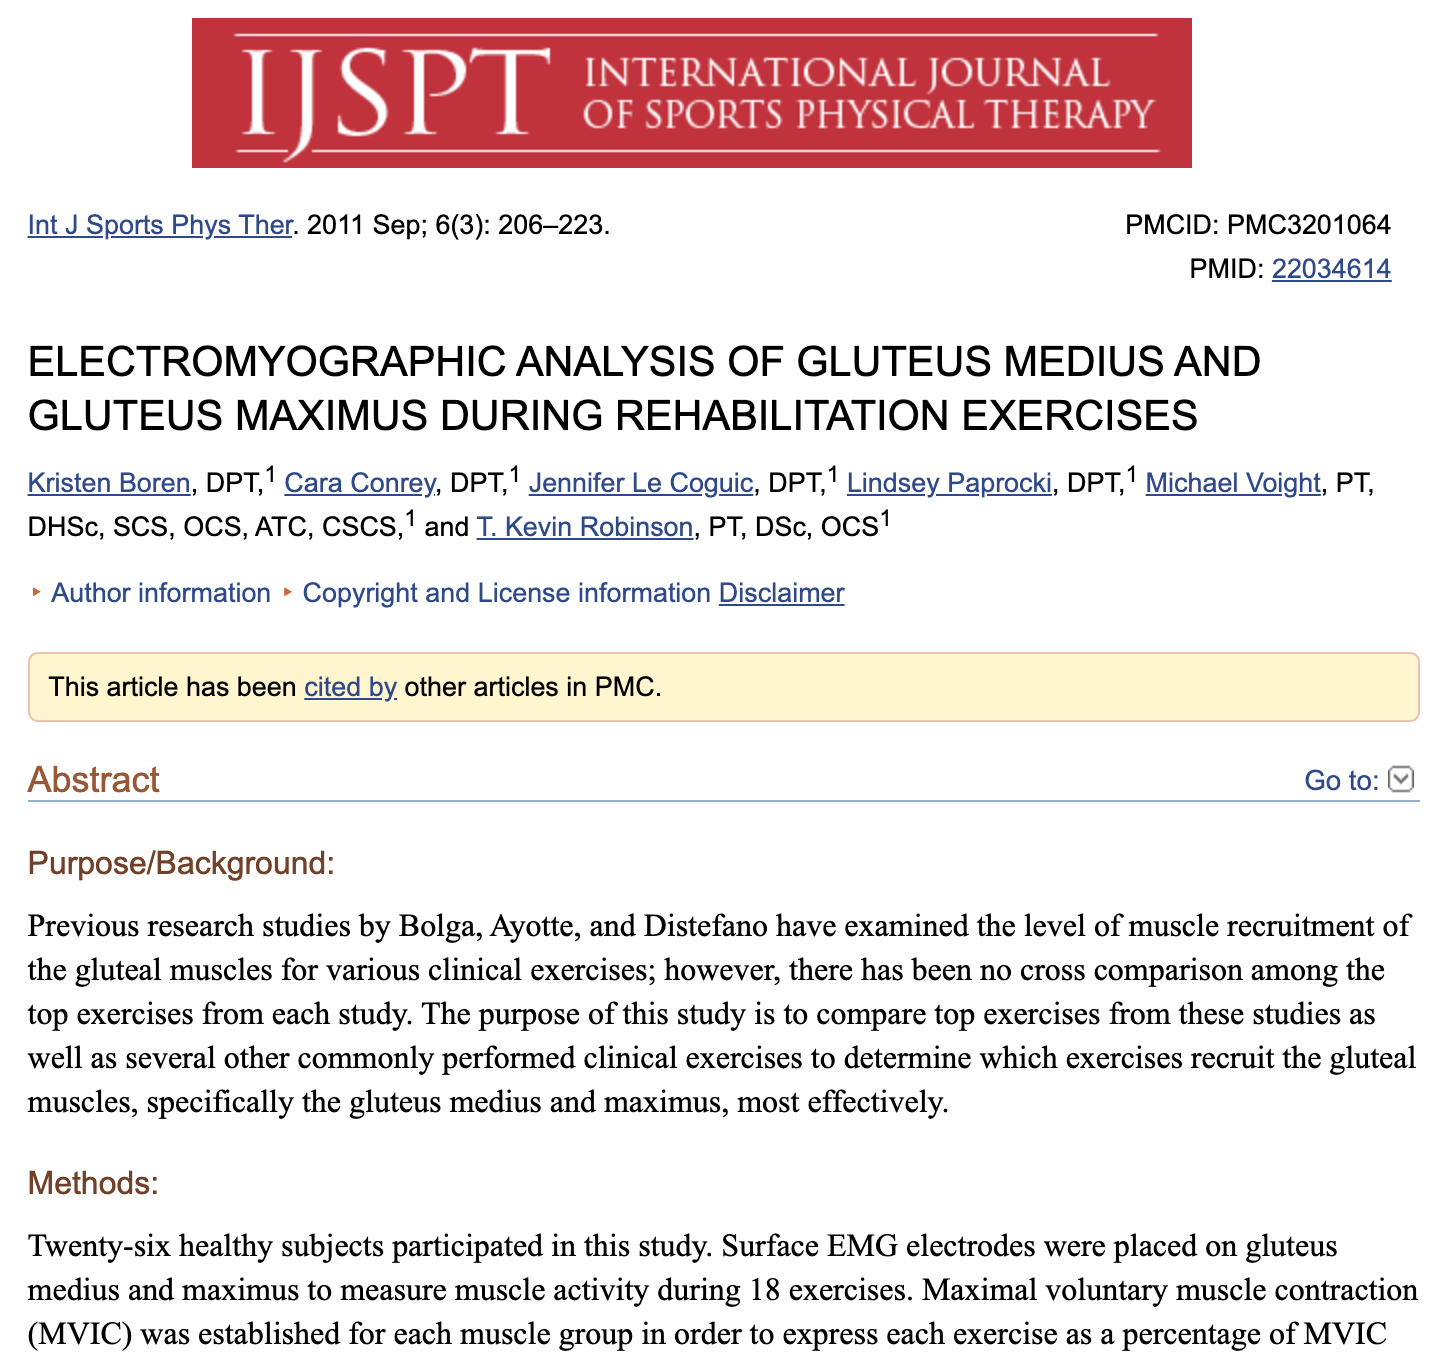 INTERNATIONAL JOURNAL OF SPORTS PHYSICAL THERAPY, SEPTEMBER 2011: Electromyographic Analysis of Gluteus Medius And Gluteus Maximus During Rehabilitation Exercises